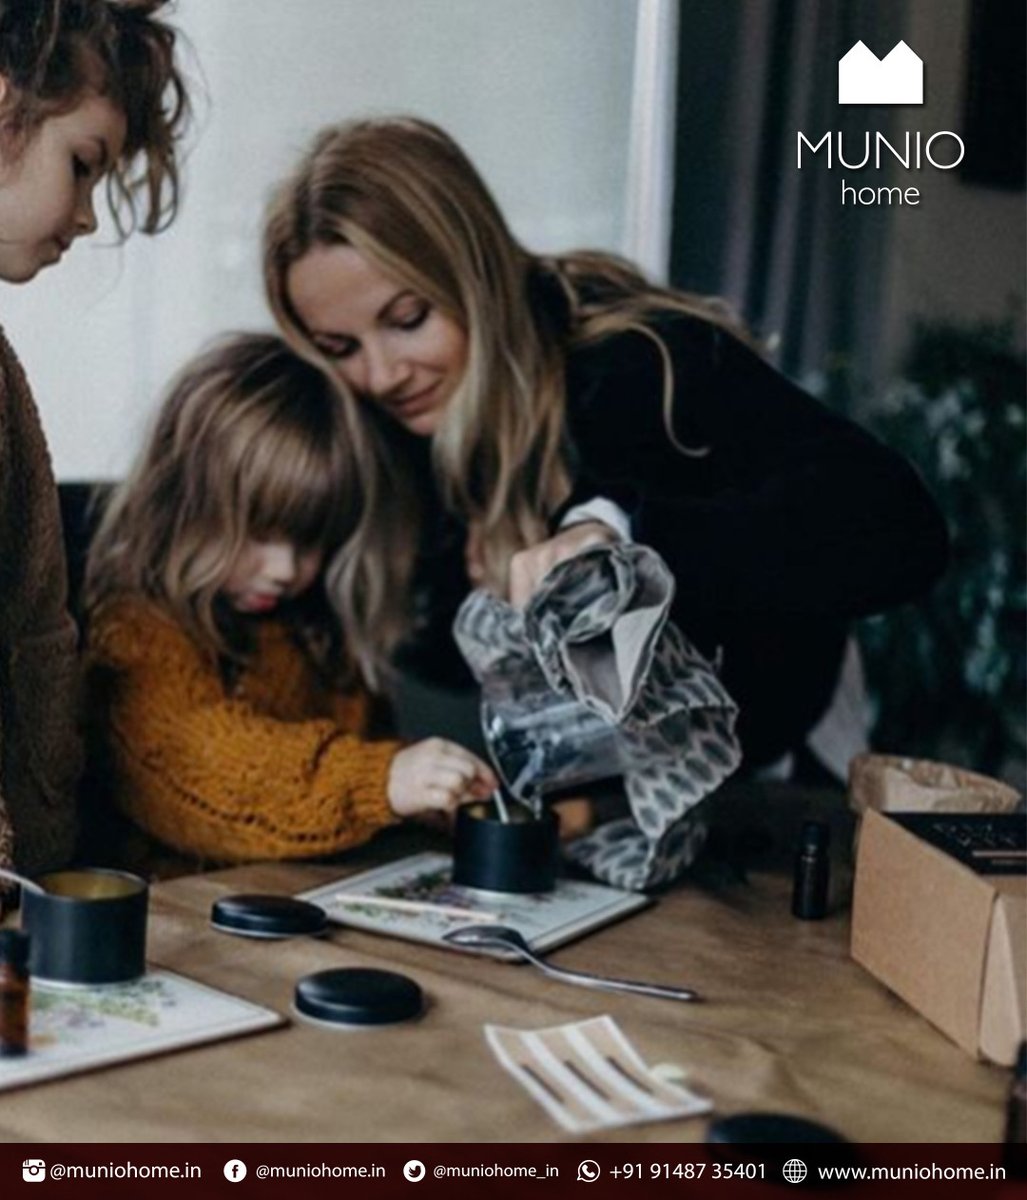 Time well spent together. We love seeing photos of families enjoying our DIY candle making kit 🕯.
.
🖤✨#diycandle #candlekit #familytime #candle #artisanalcandle #designcandle #handmade #homediy #hygge #naturecandle